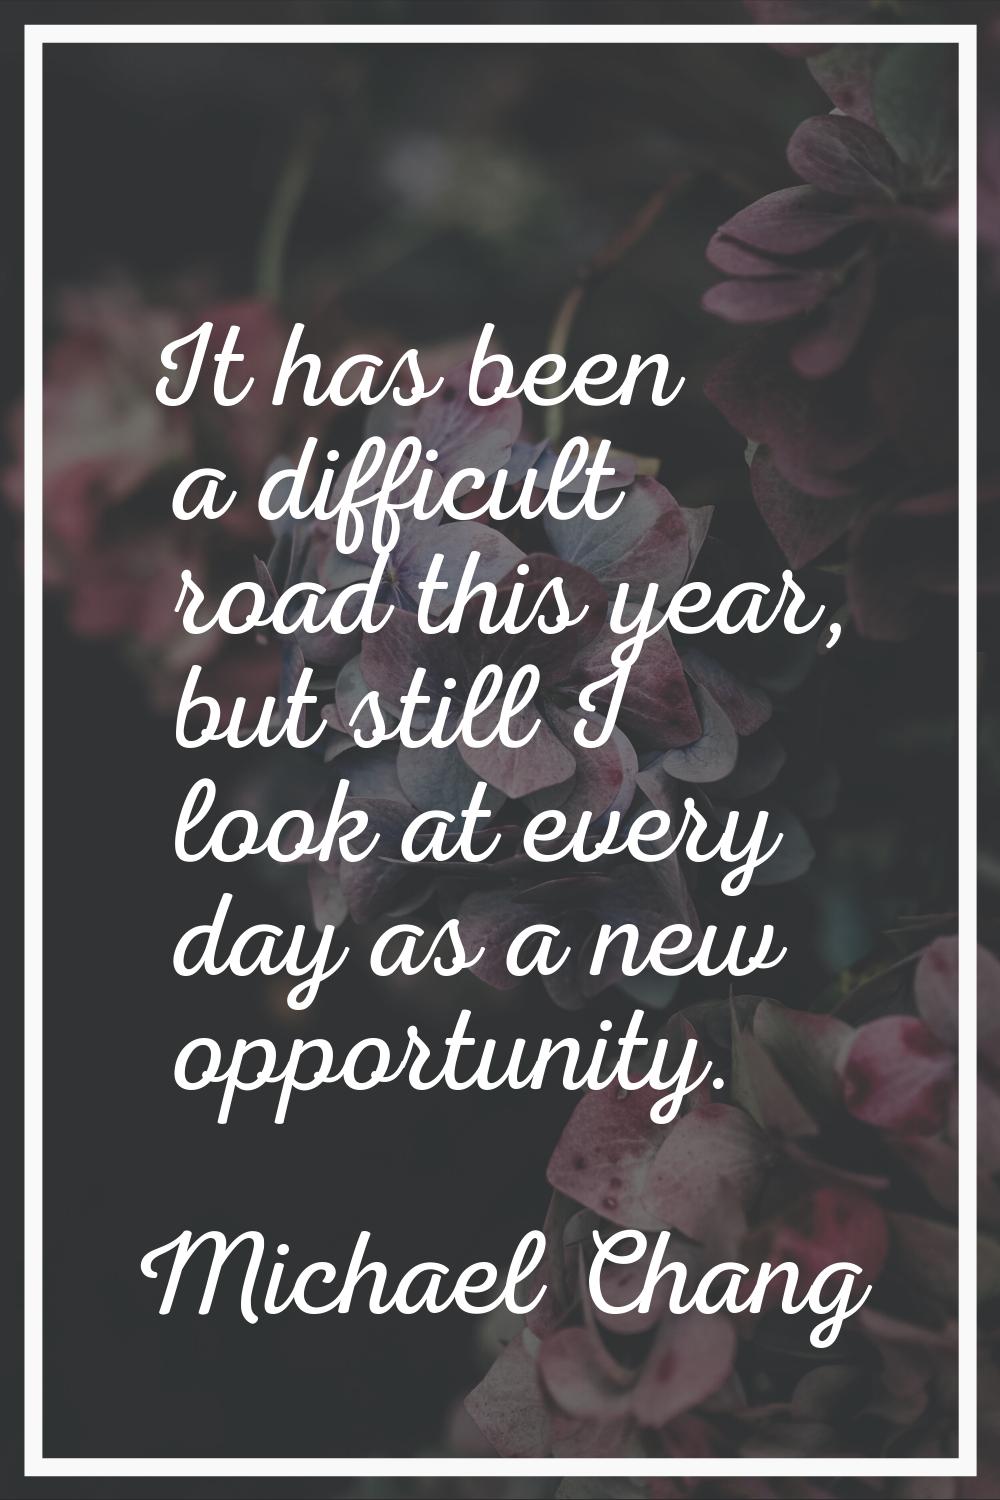 It has been a difficult road this year, but still I look at every day as a new opportunity.